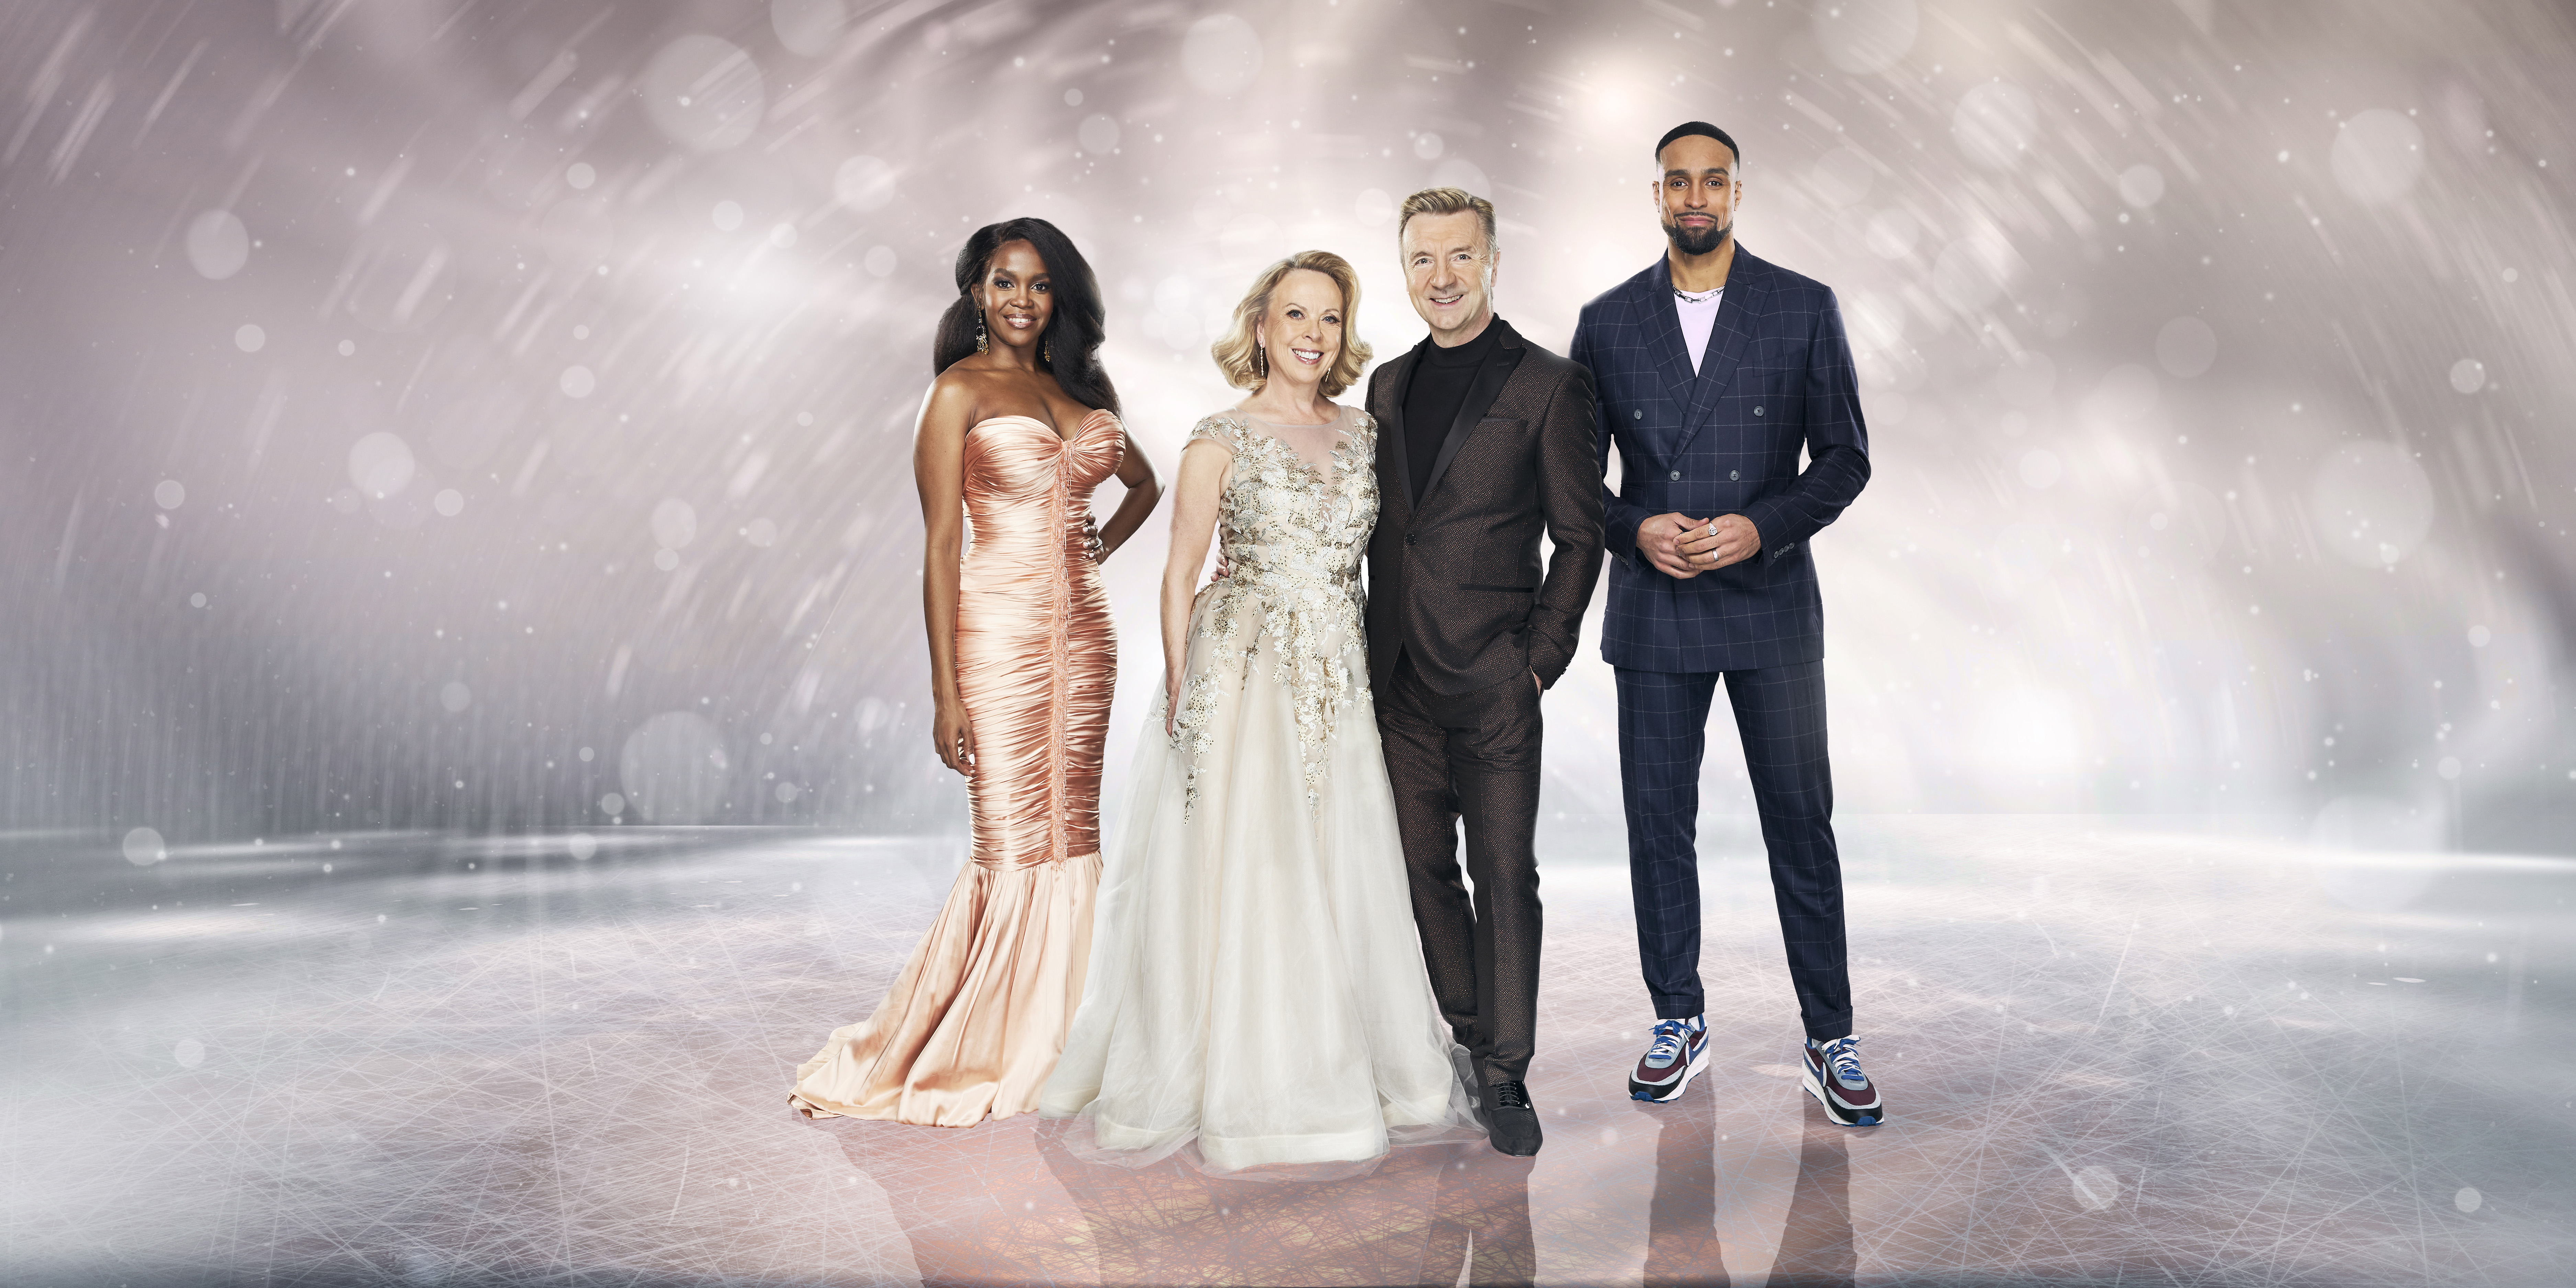 Torvill and Dean with fellow judges Oti Mabuse and Ashley Banjo.